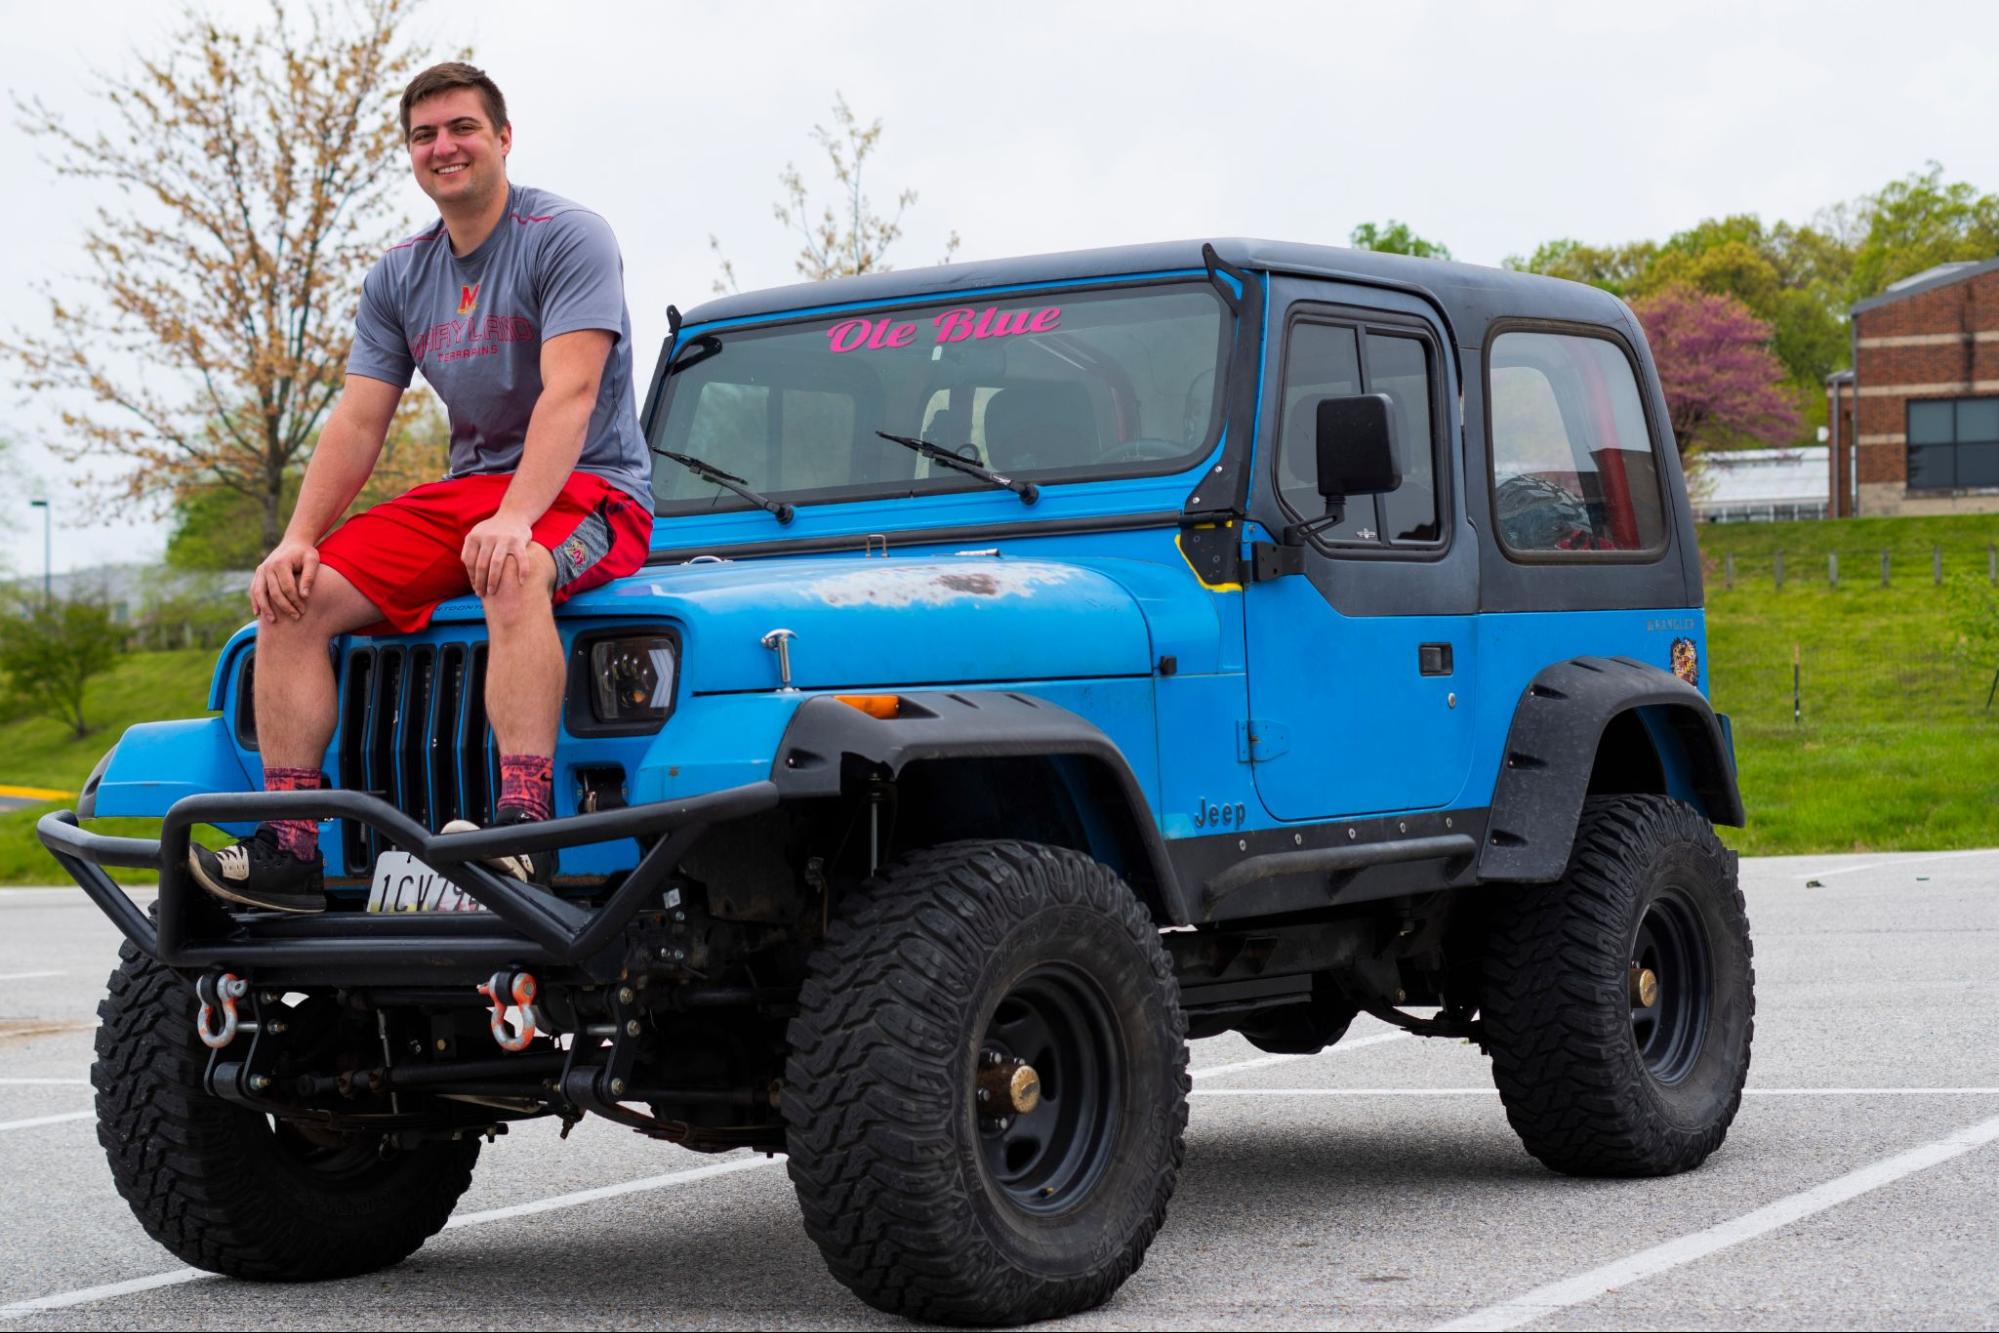 One of a kind: UMD students show off their customized Jeep Wranglers